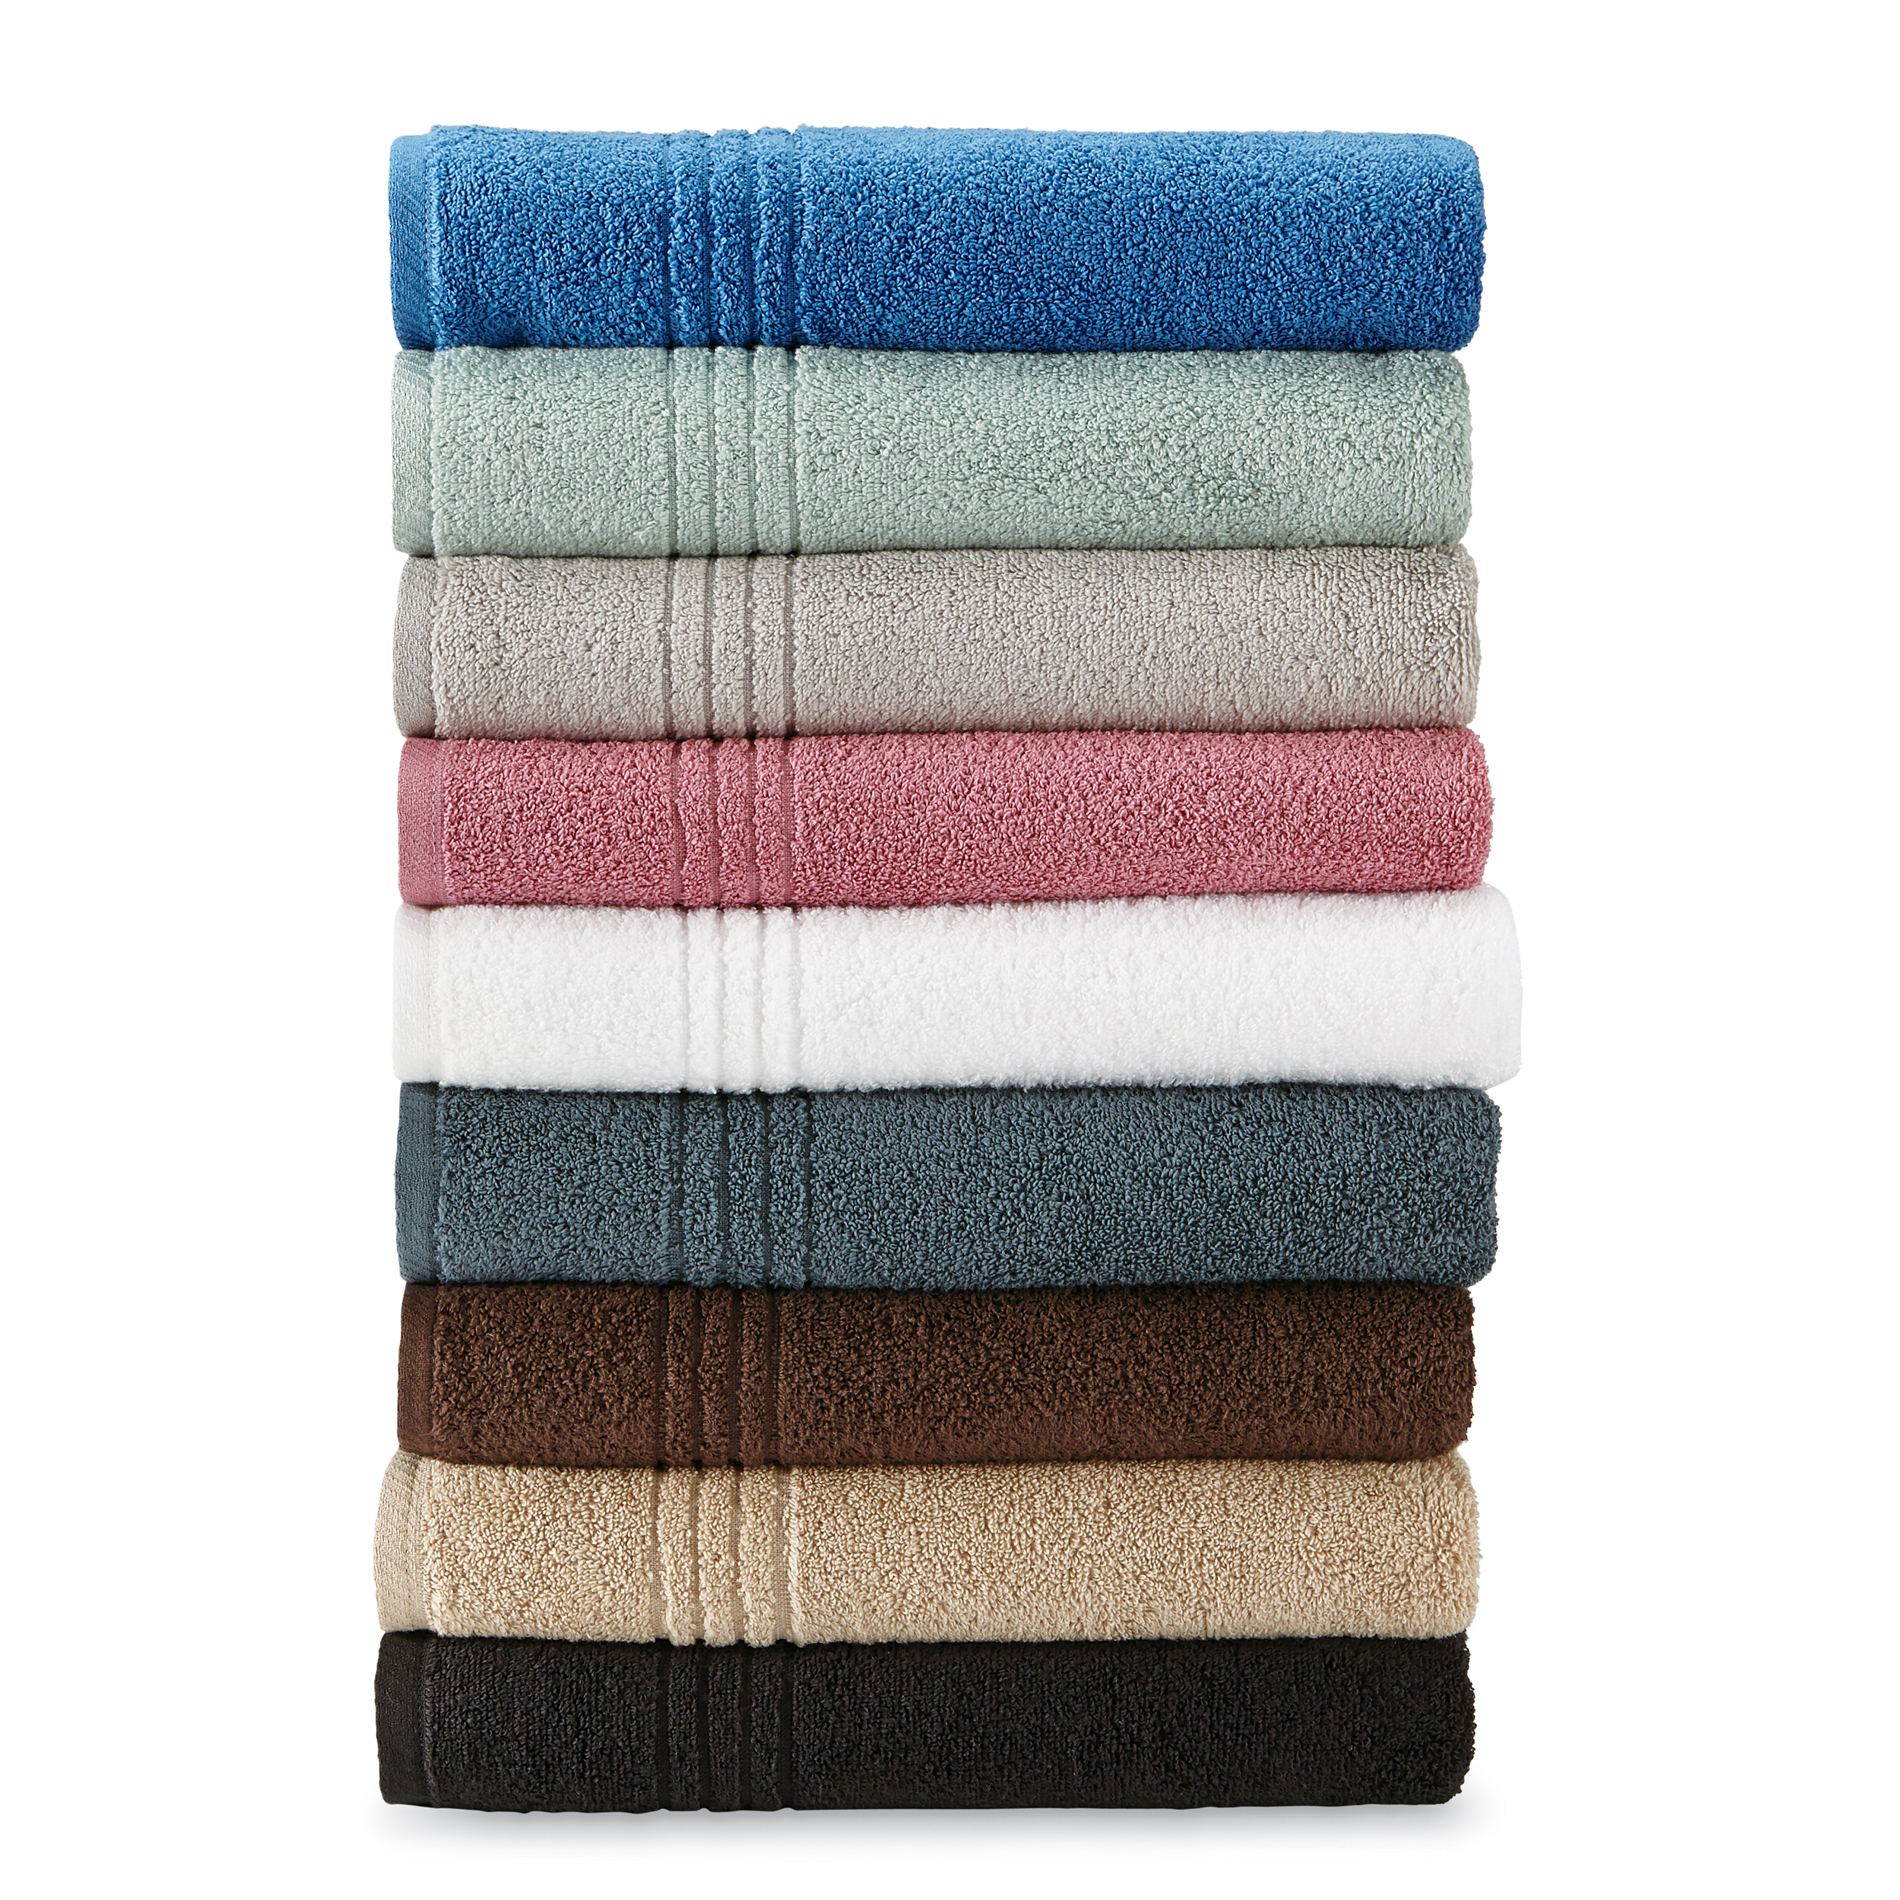 Cannon Quick Dry Cotton Bath Towels Hand Towels or Washcloths